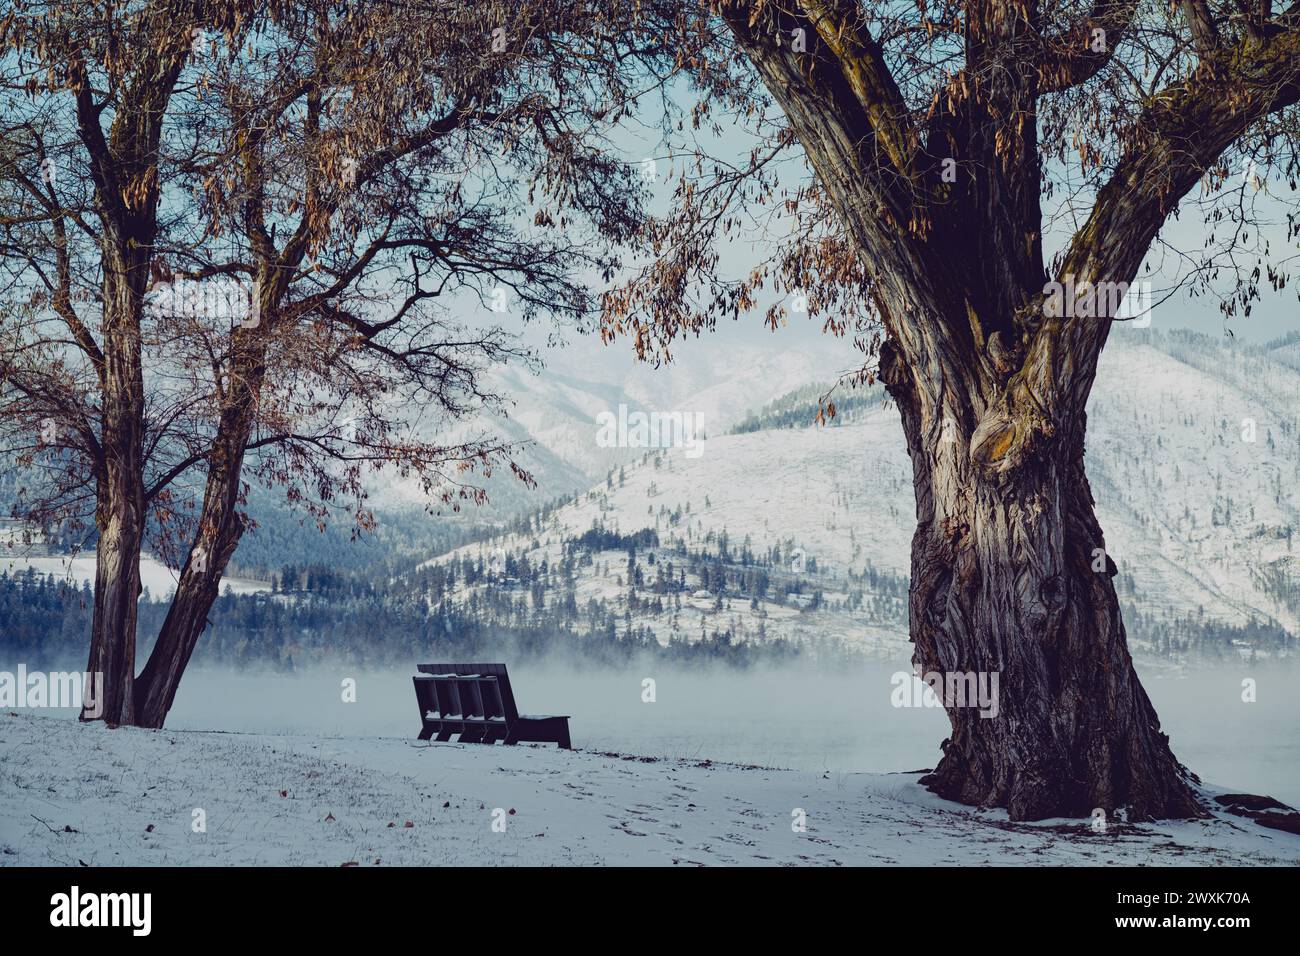 Bench - perfectly located to enjoy views of Lake Chelan - sits between two graceful trees in a snow-covered landscape Stock Photo